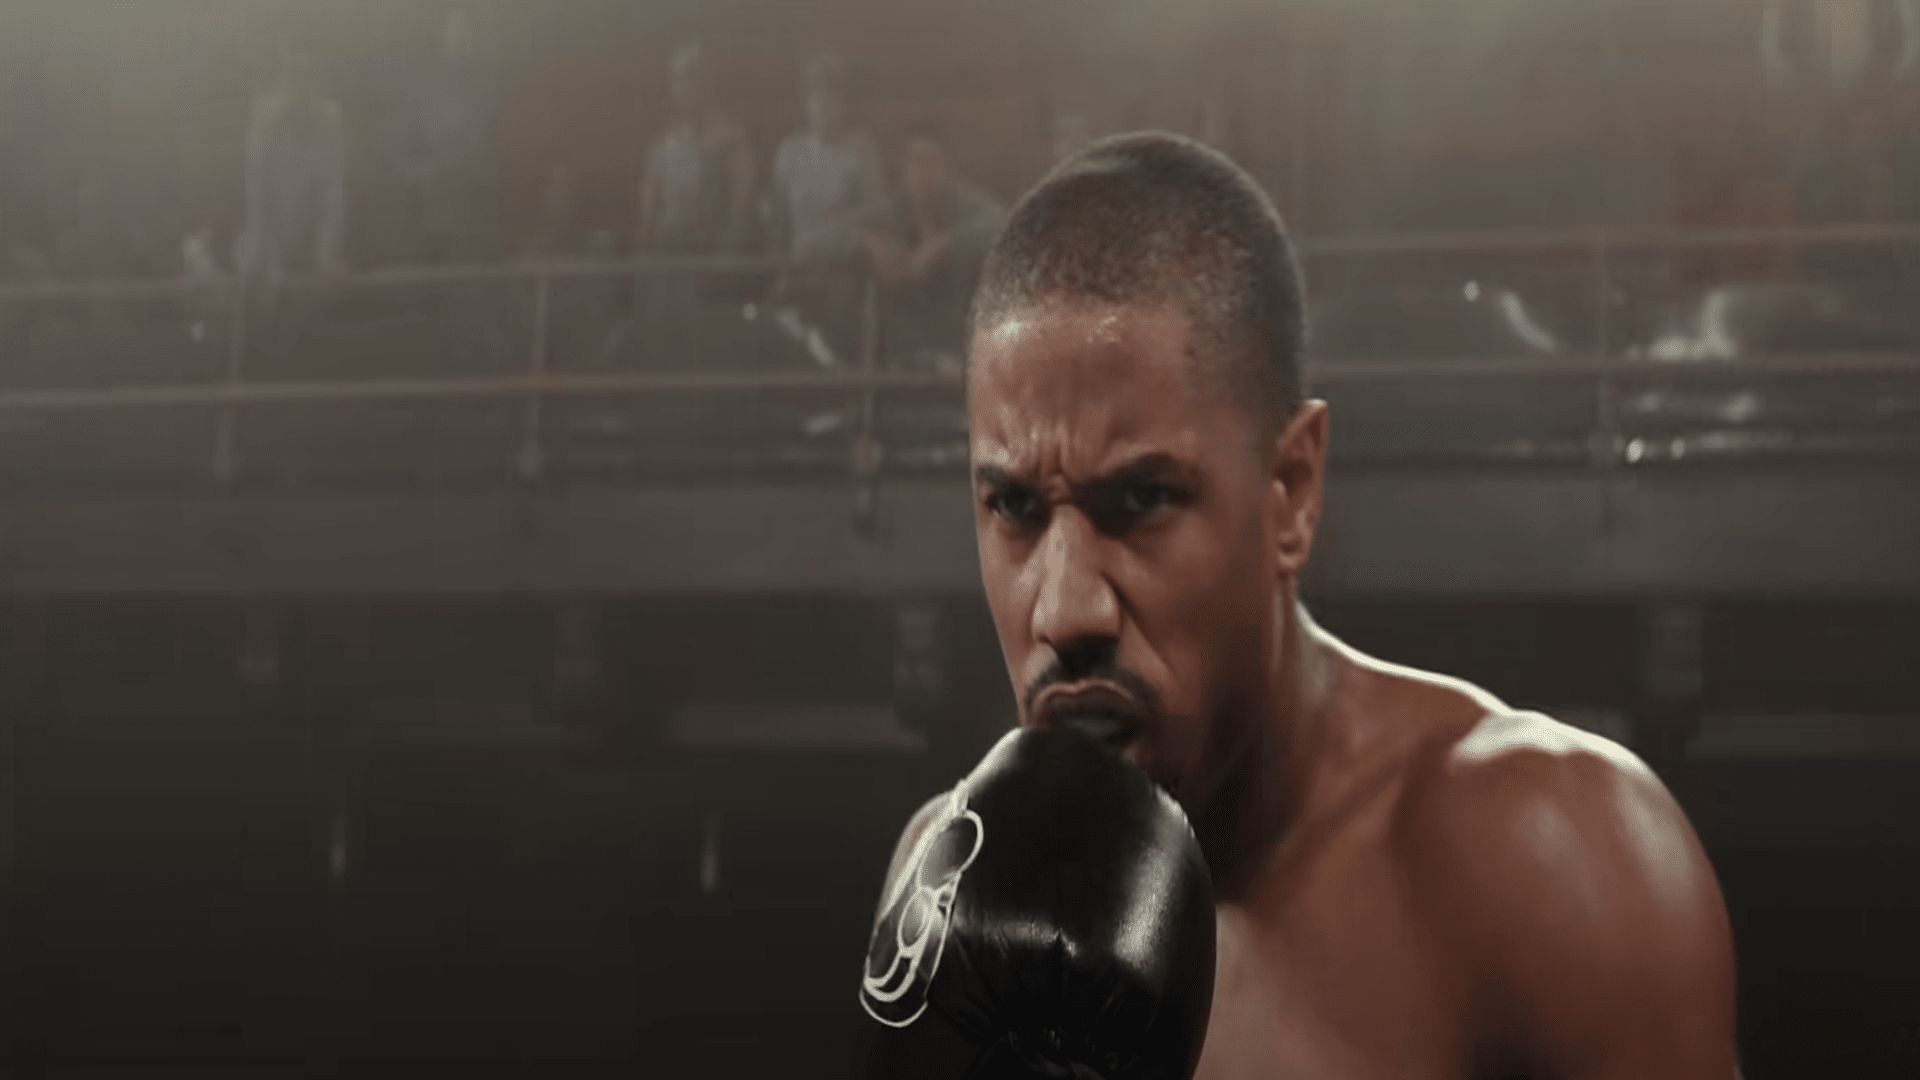 A still from the movie Creed (Image by Warner Bros. Pictures)